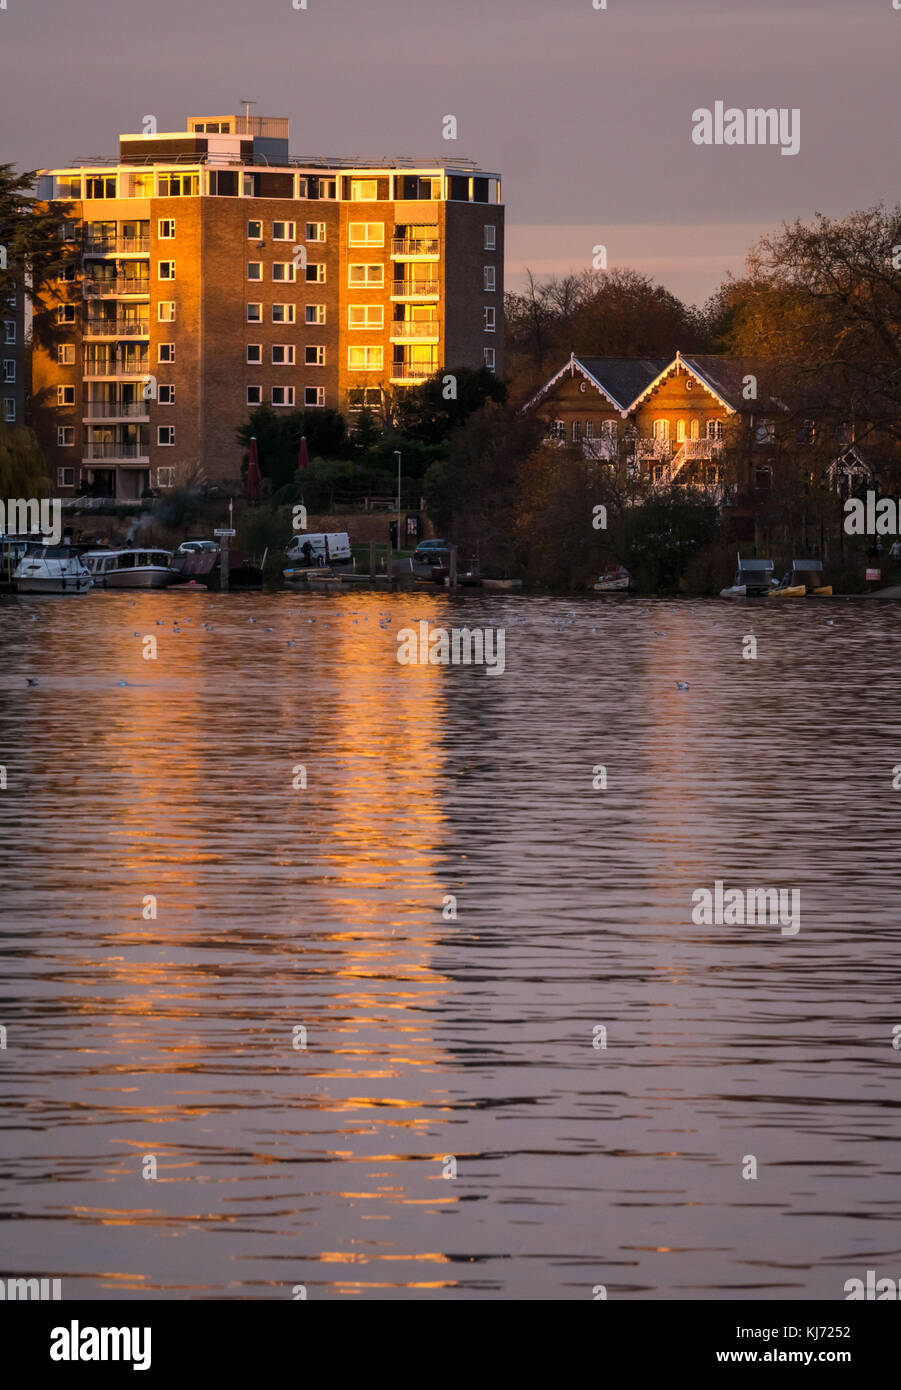 Autumn sunset colours on Thames River, Hampton Wick looking East down river to a high modern apartment block reflected in the water, London, UK Stock Photo